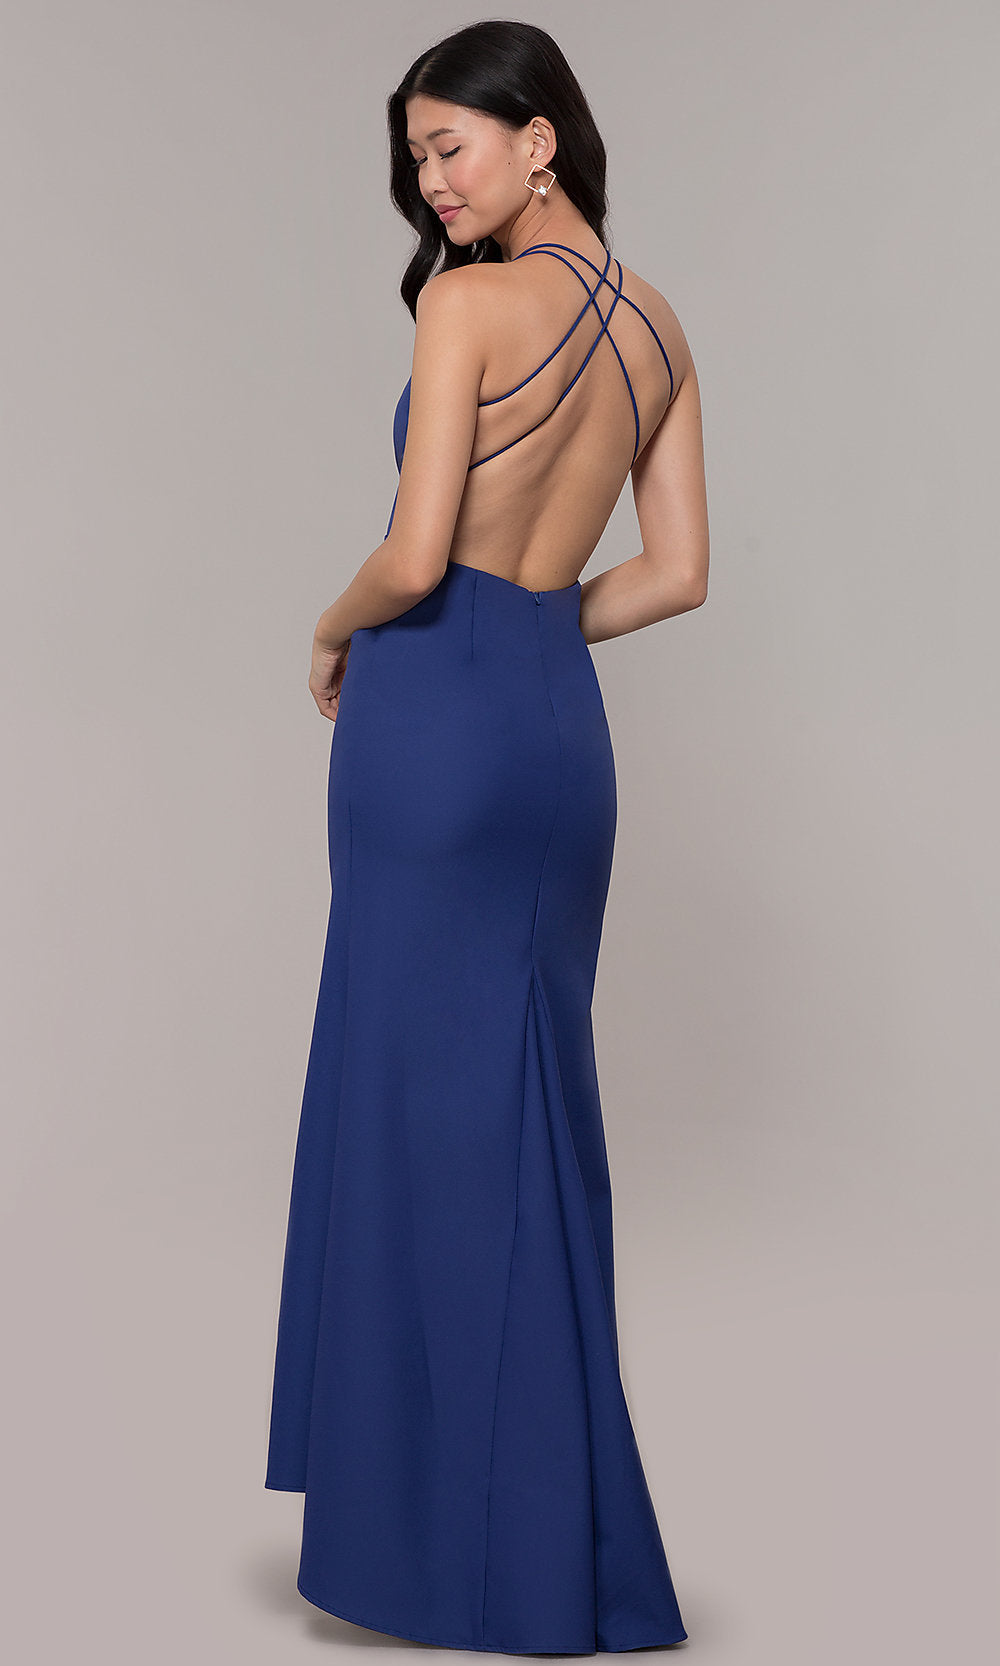  Deep-V-Neck Long High-Low Formal Dress with Open Back